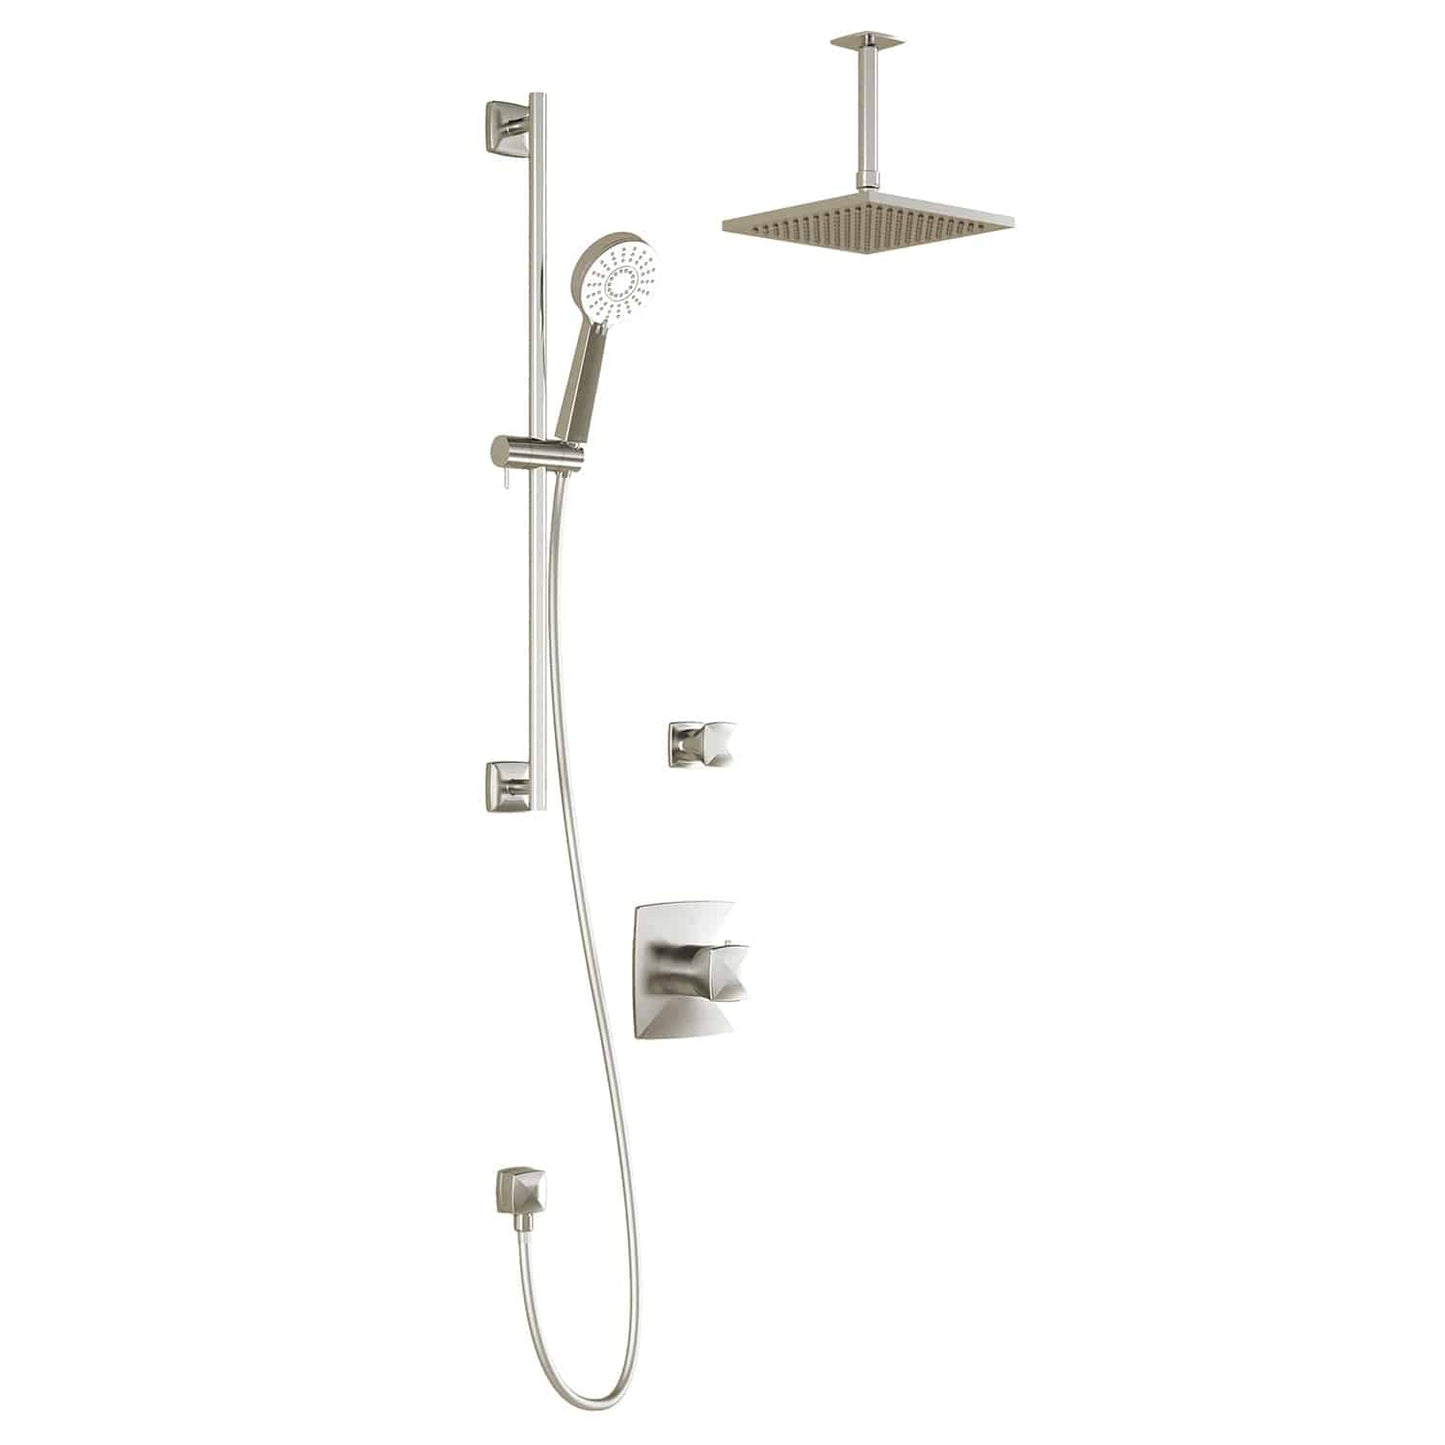 Kalia UMANI TD2 AQUATONIK T/P Shower System with 8" Square Shower Head Round Hand Shower and Vertical Ceiling Arm- Brushed Nickel PVD